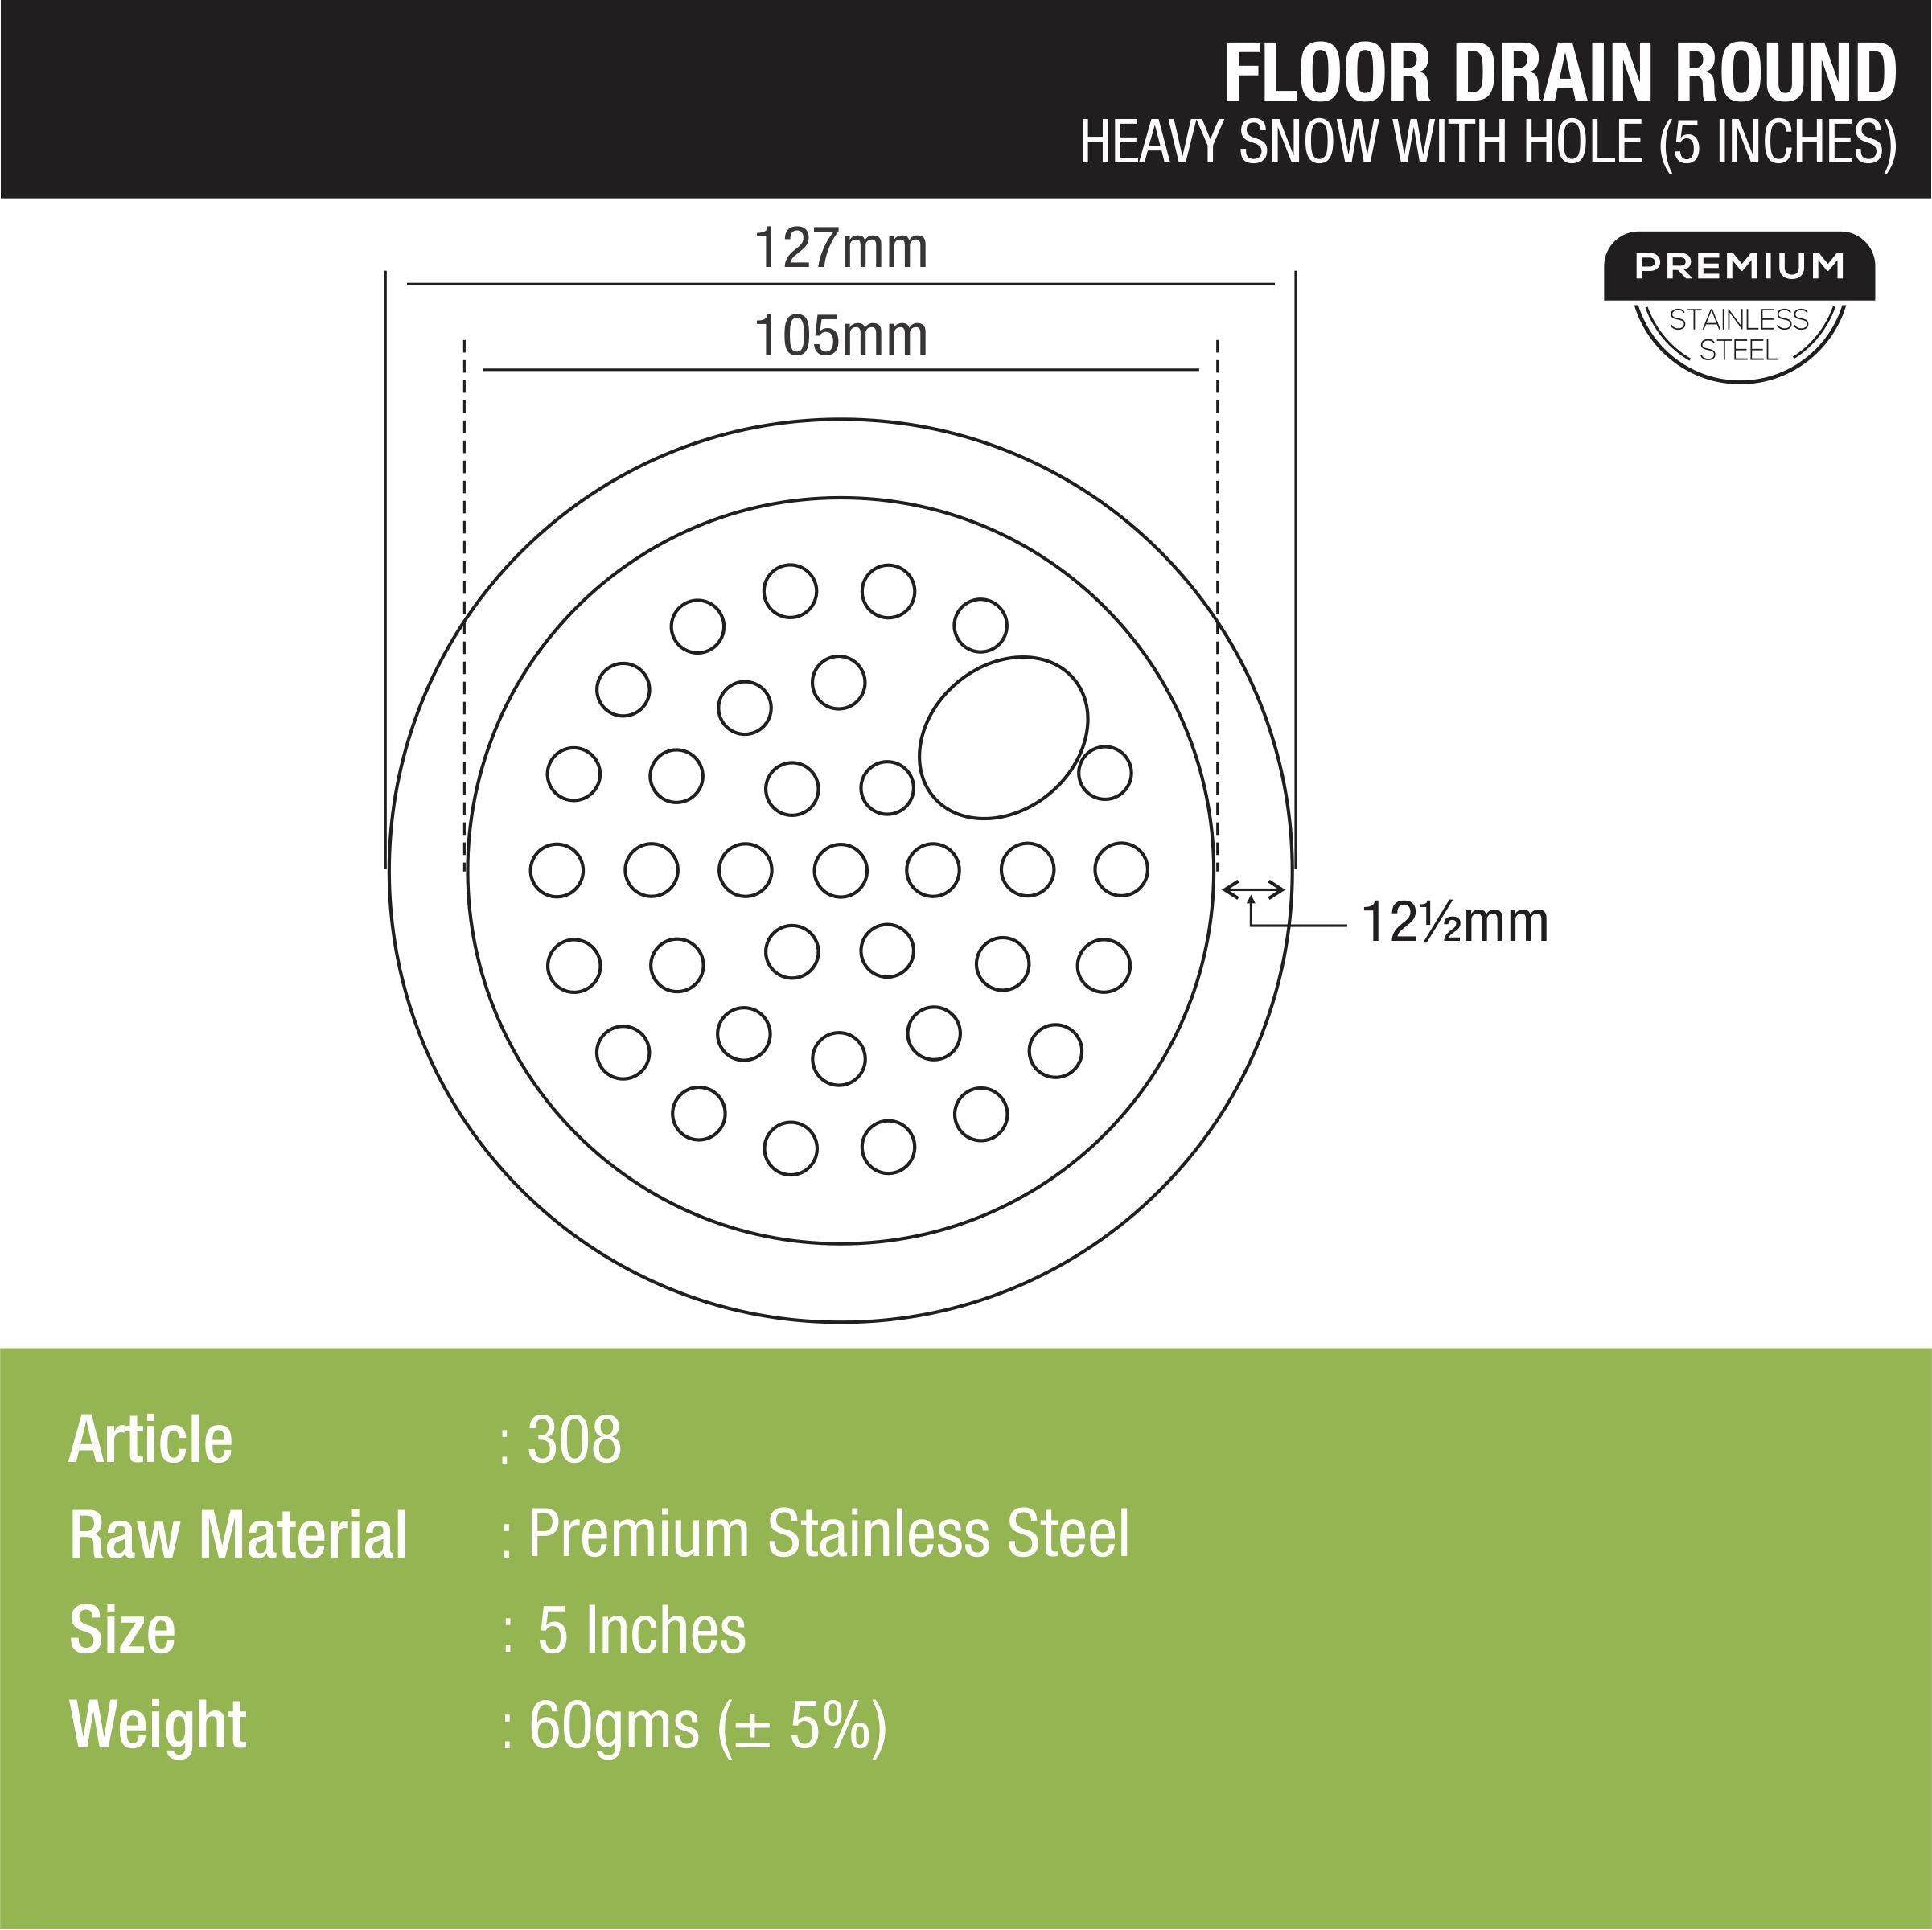 Heavy Snow Round Floor Drain with Hole (5 inches) dimensions and sizes